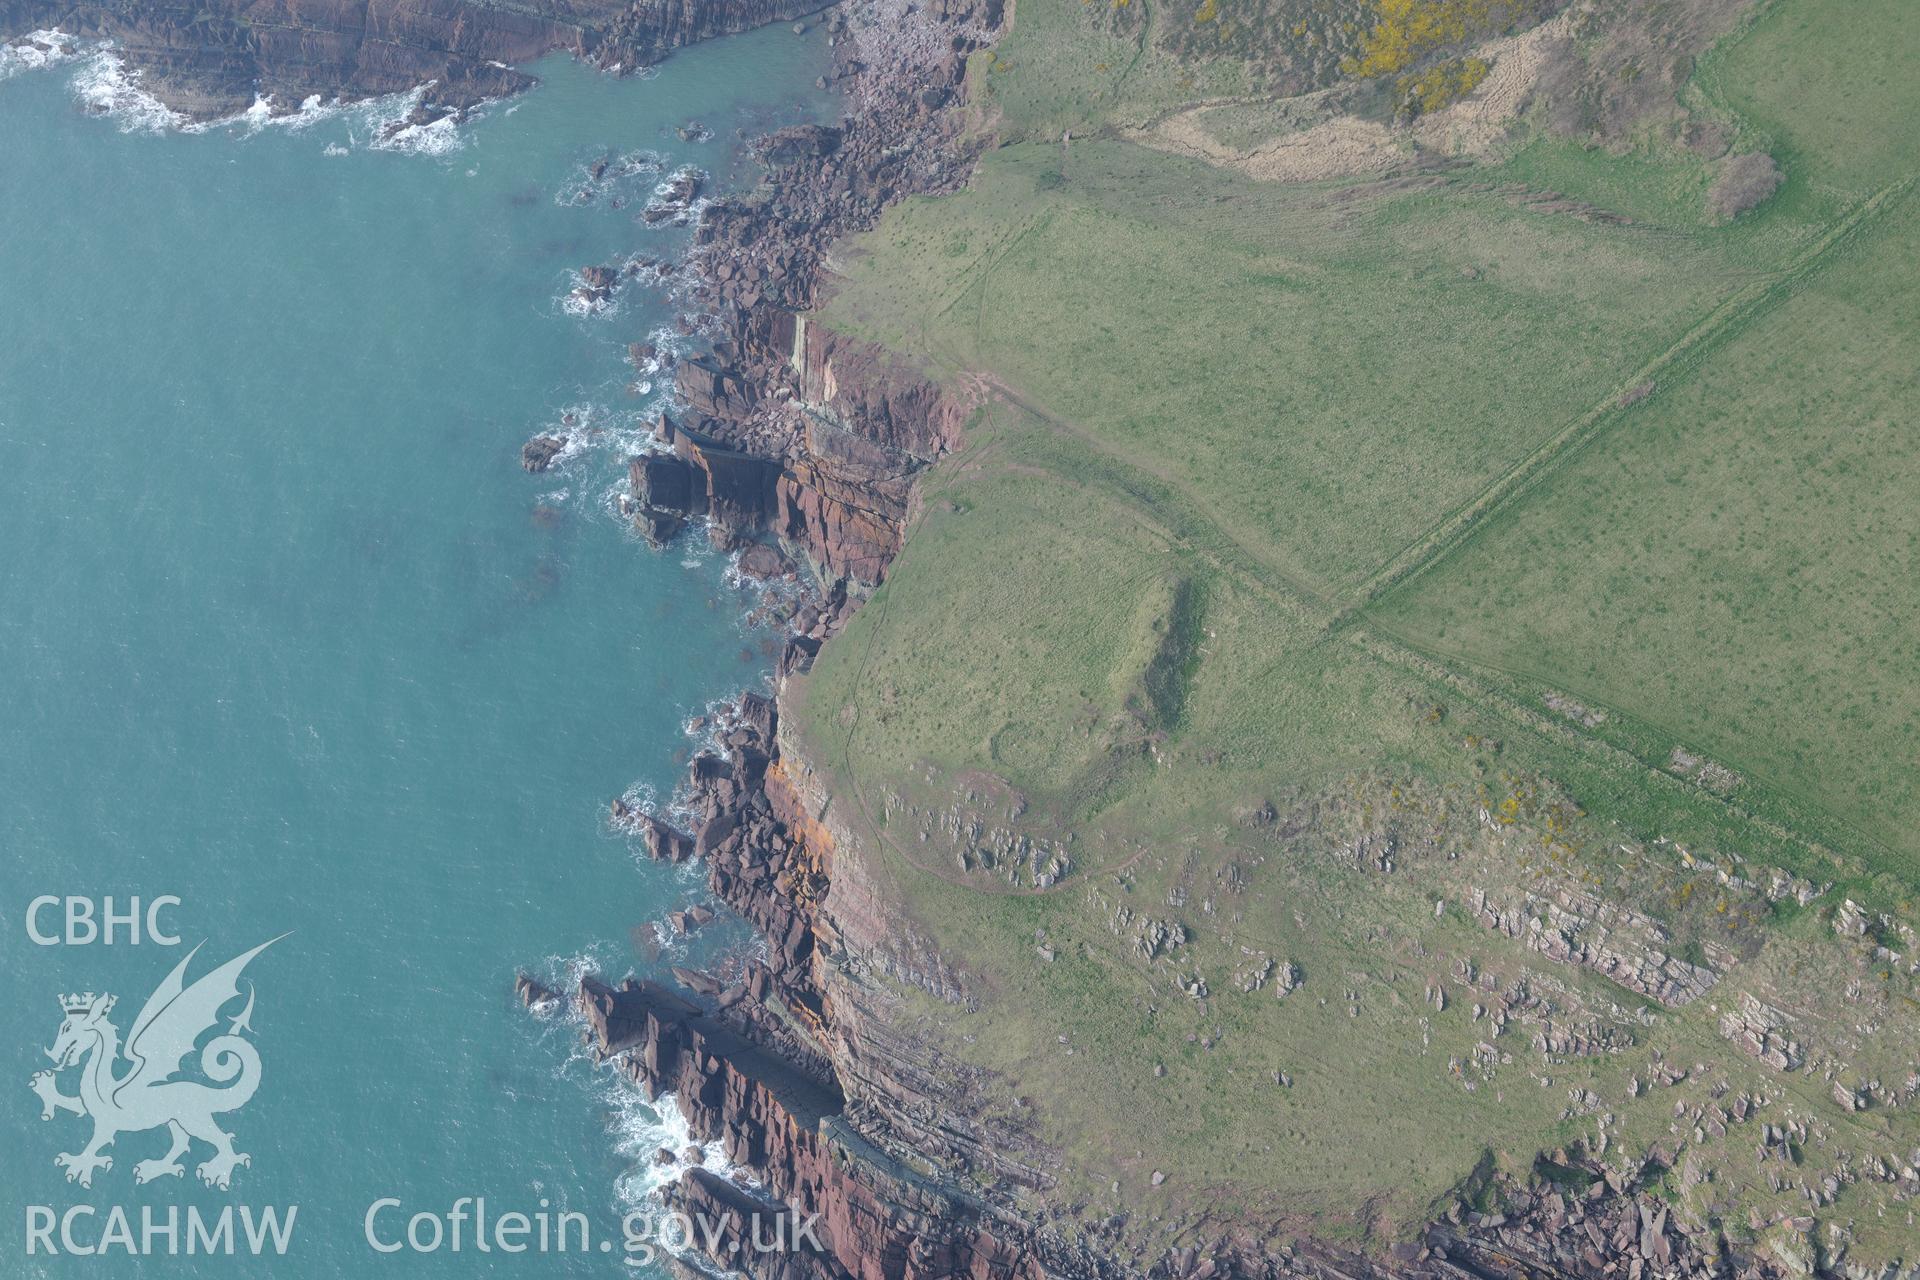 Aerial photography of West Pickard Bay promontory fort taken on 27th March 2017. Baseline aerial reconnaissance survey for the CHERISH Project. ? Crown: CHERISH PROJECT 2019. Produced with EU funds through the Ireland Wales Co-operation Programme 2014-2020. All material made freely available through the Open Government Licence.